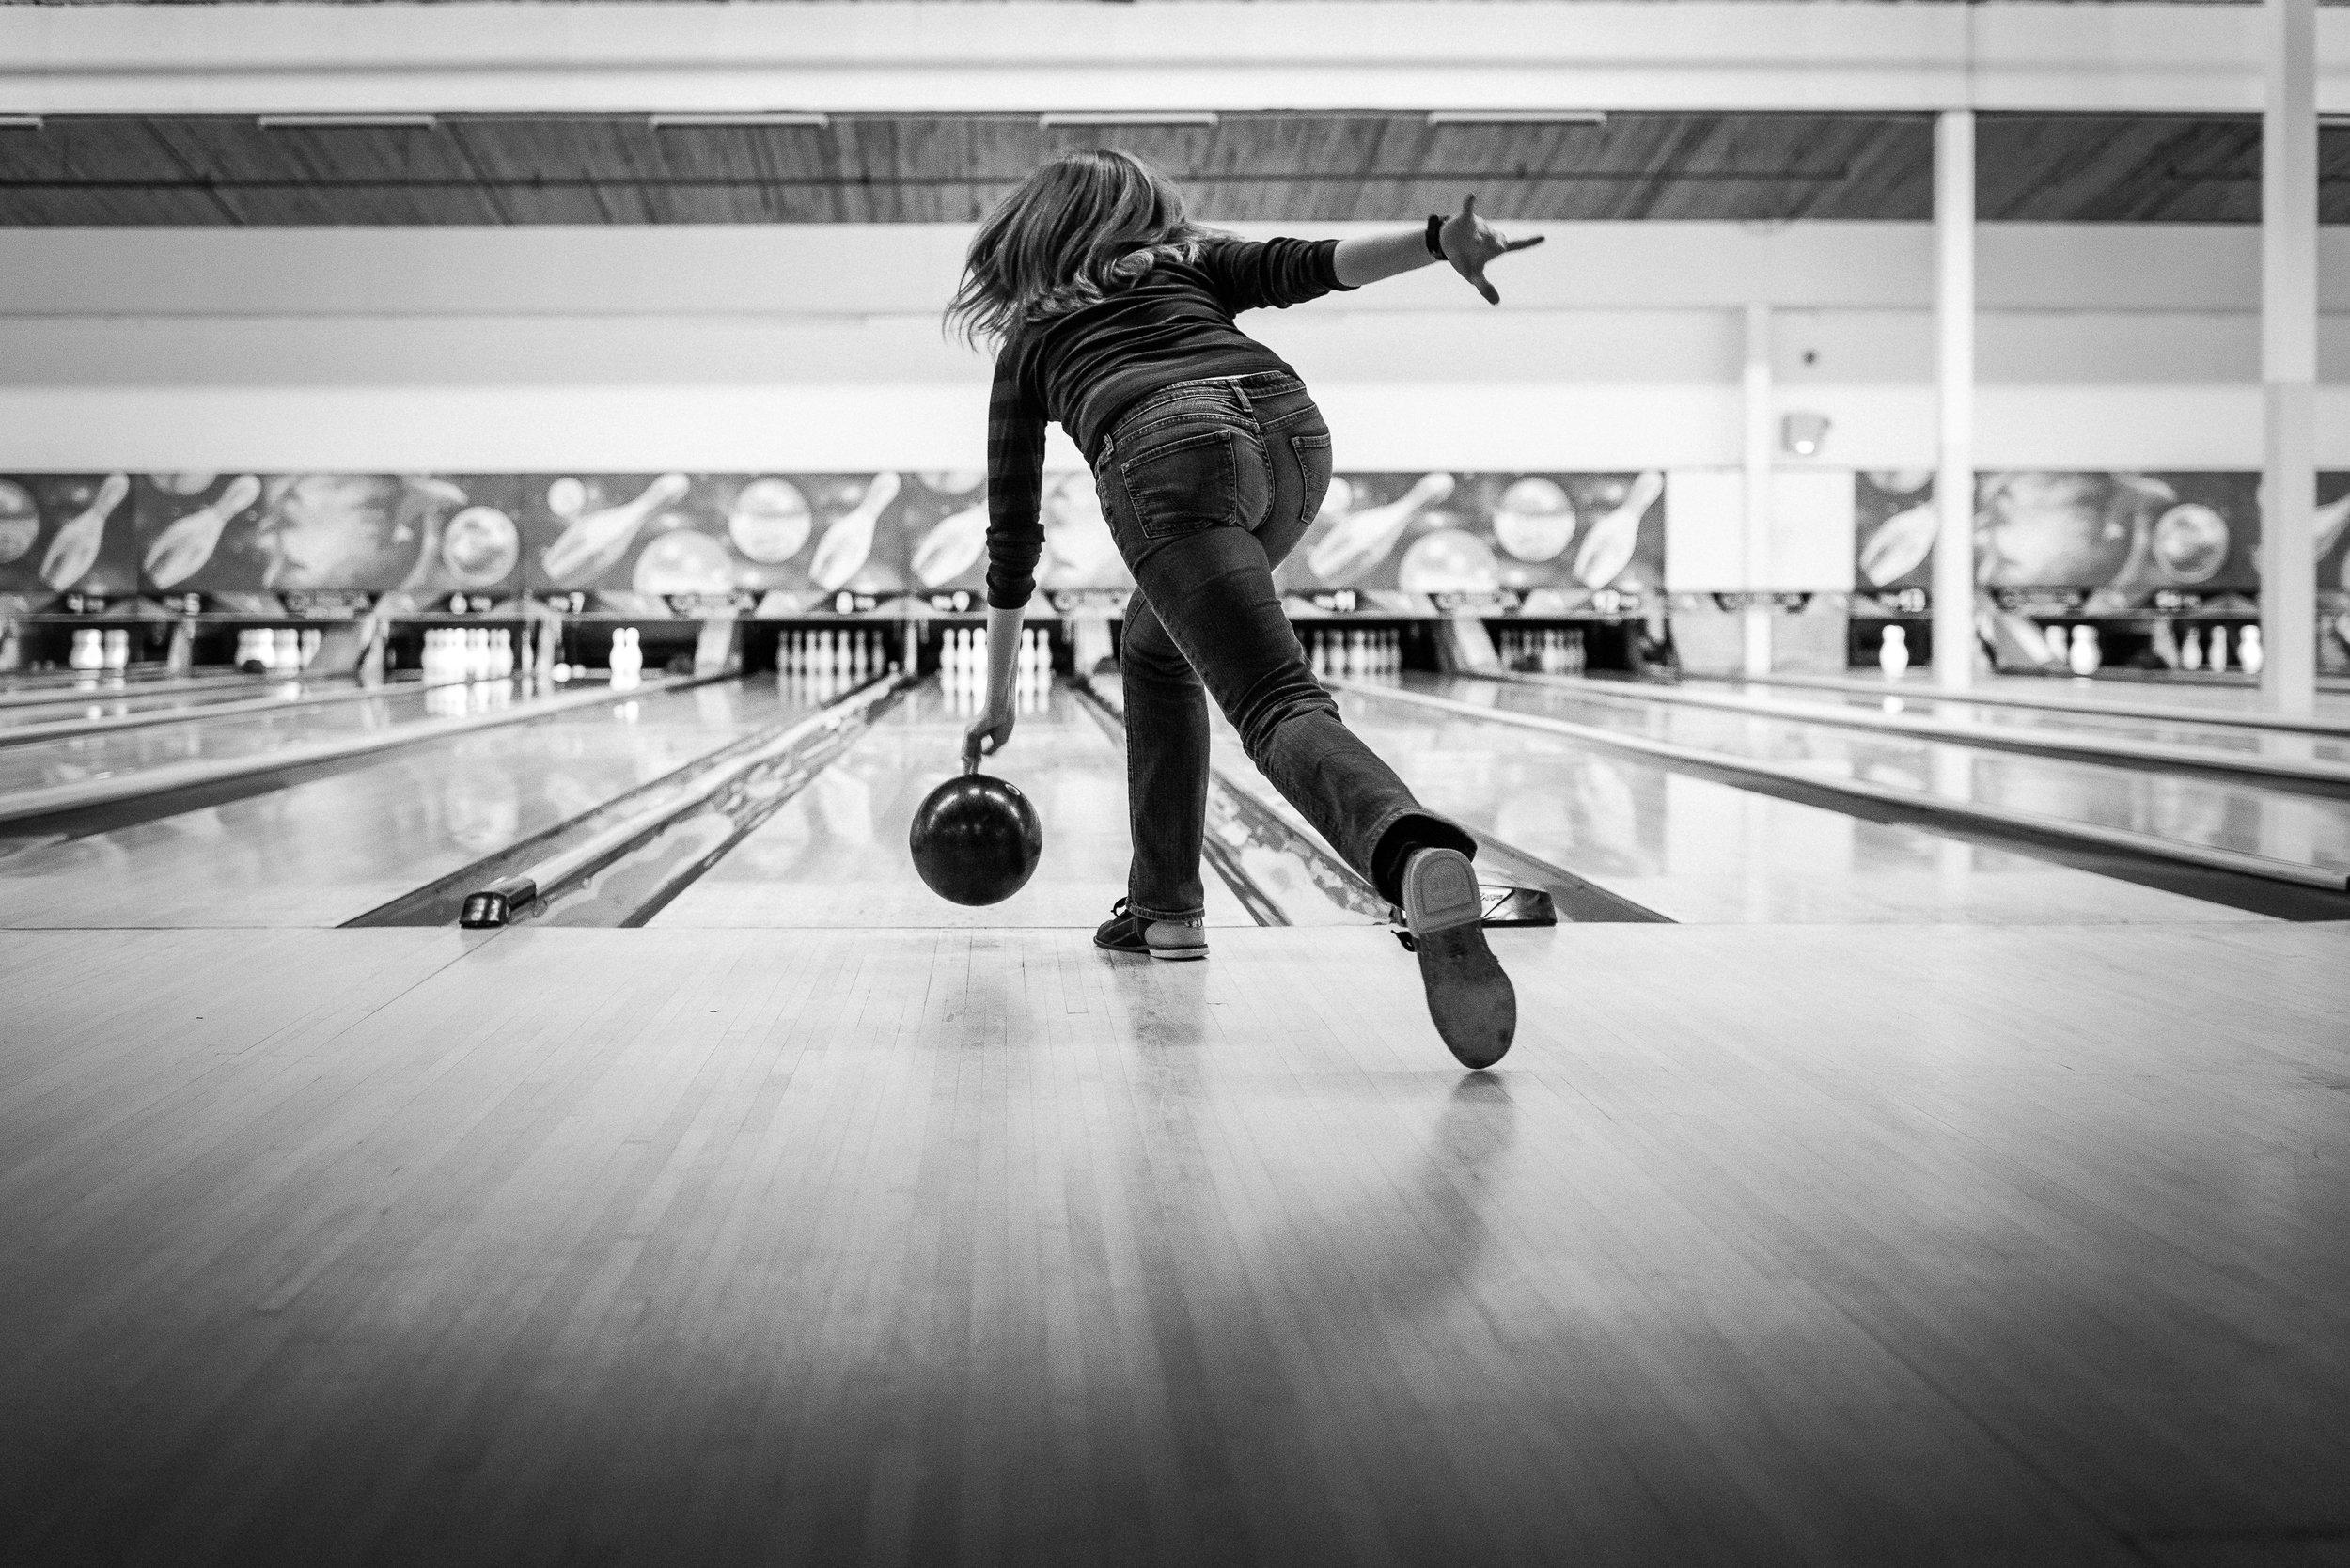 i don't know much about bowling form, but she looks legit to me.